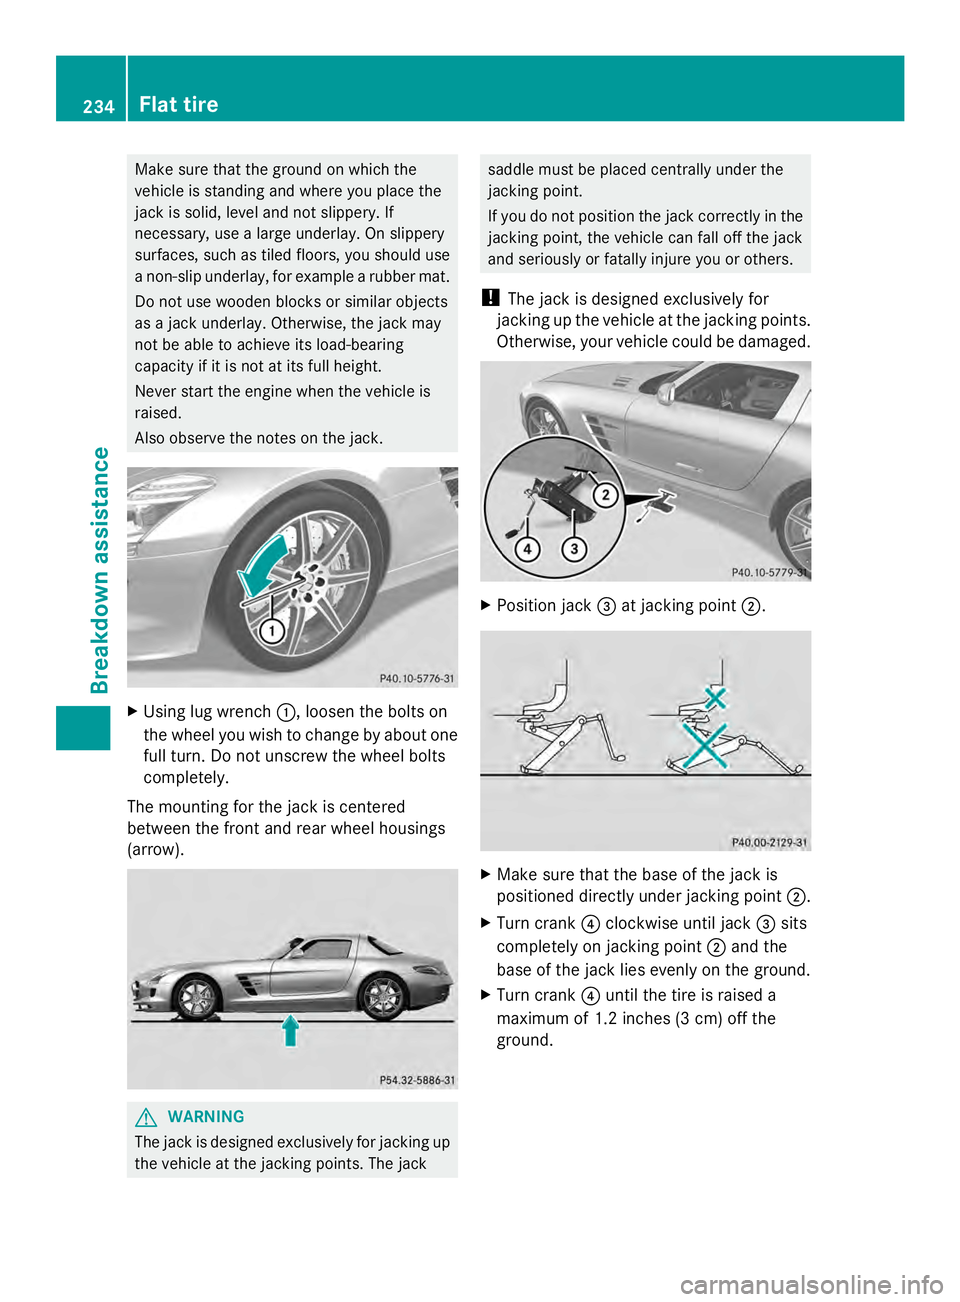 MERCEDES-BENZ SLS AMG 2013  Owners Manual Make sure that the ground on which the
vehicle is standing and where you place the
jack is solid, level and not slippery. If
necessary, use a large underlay. On slippery
surfaces, such as tiled floors